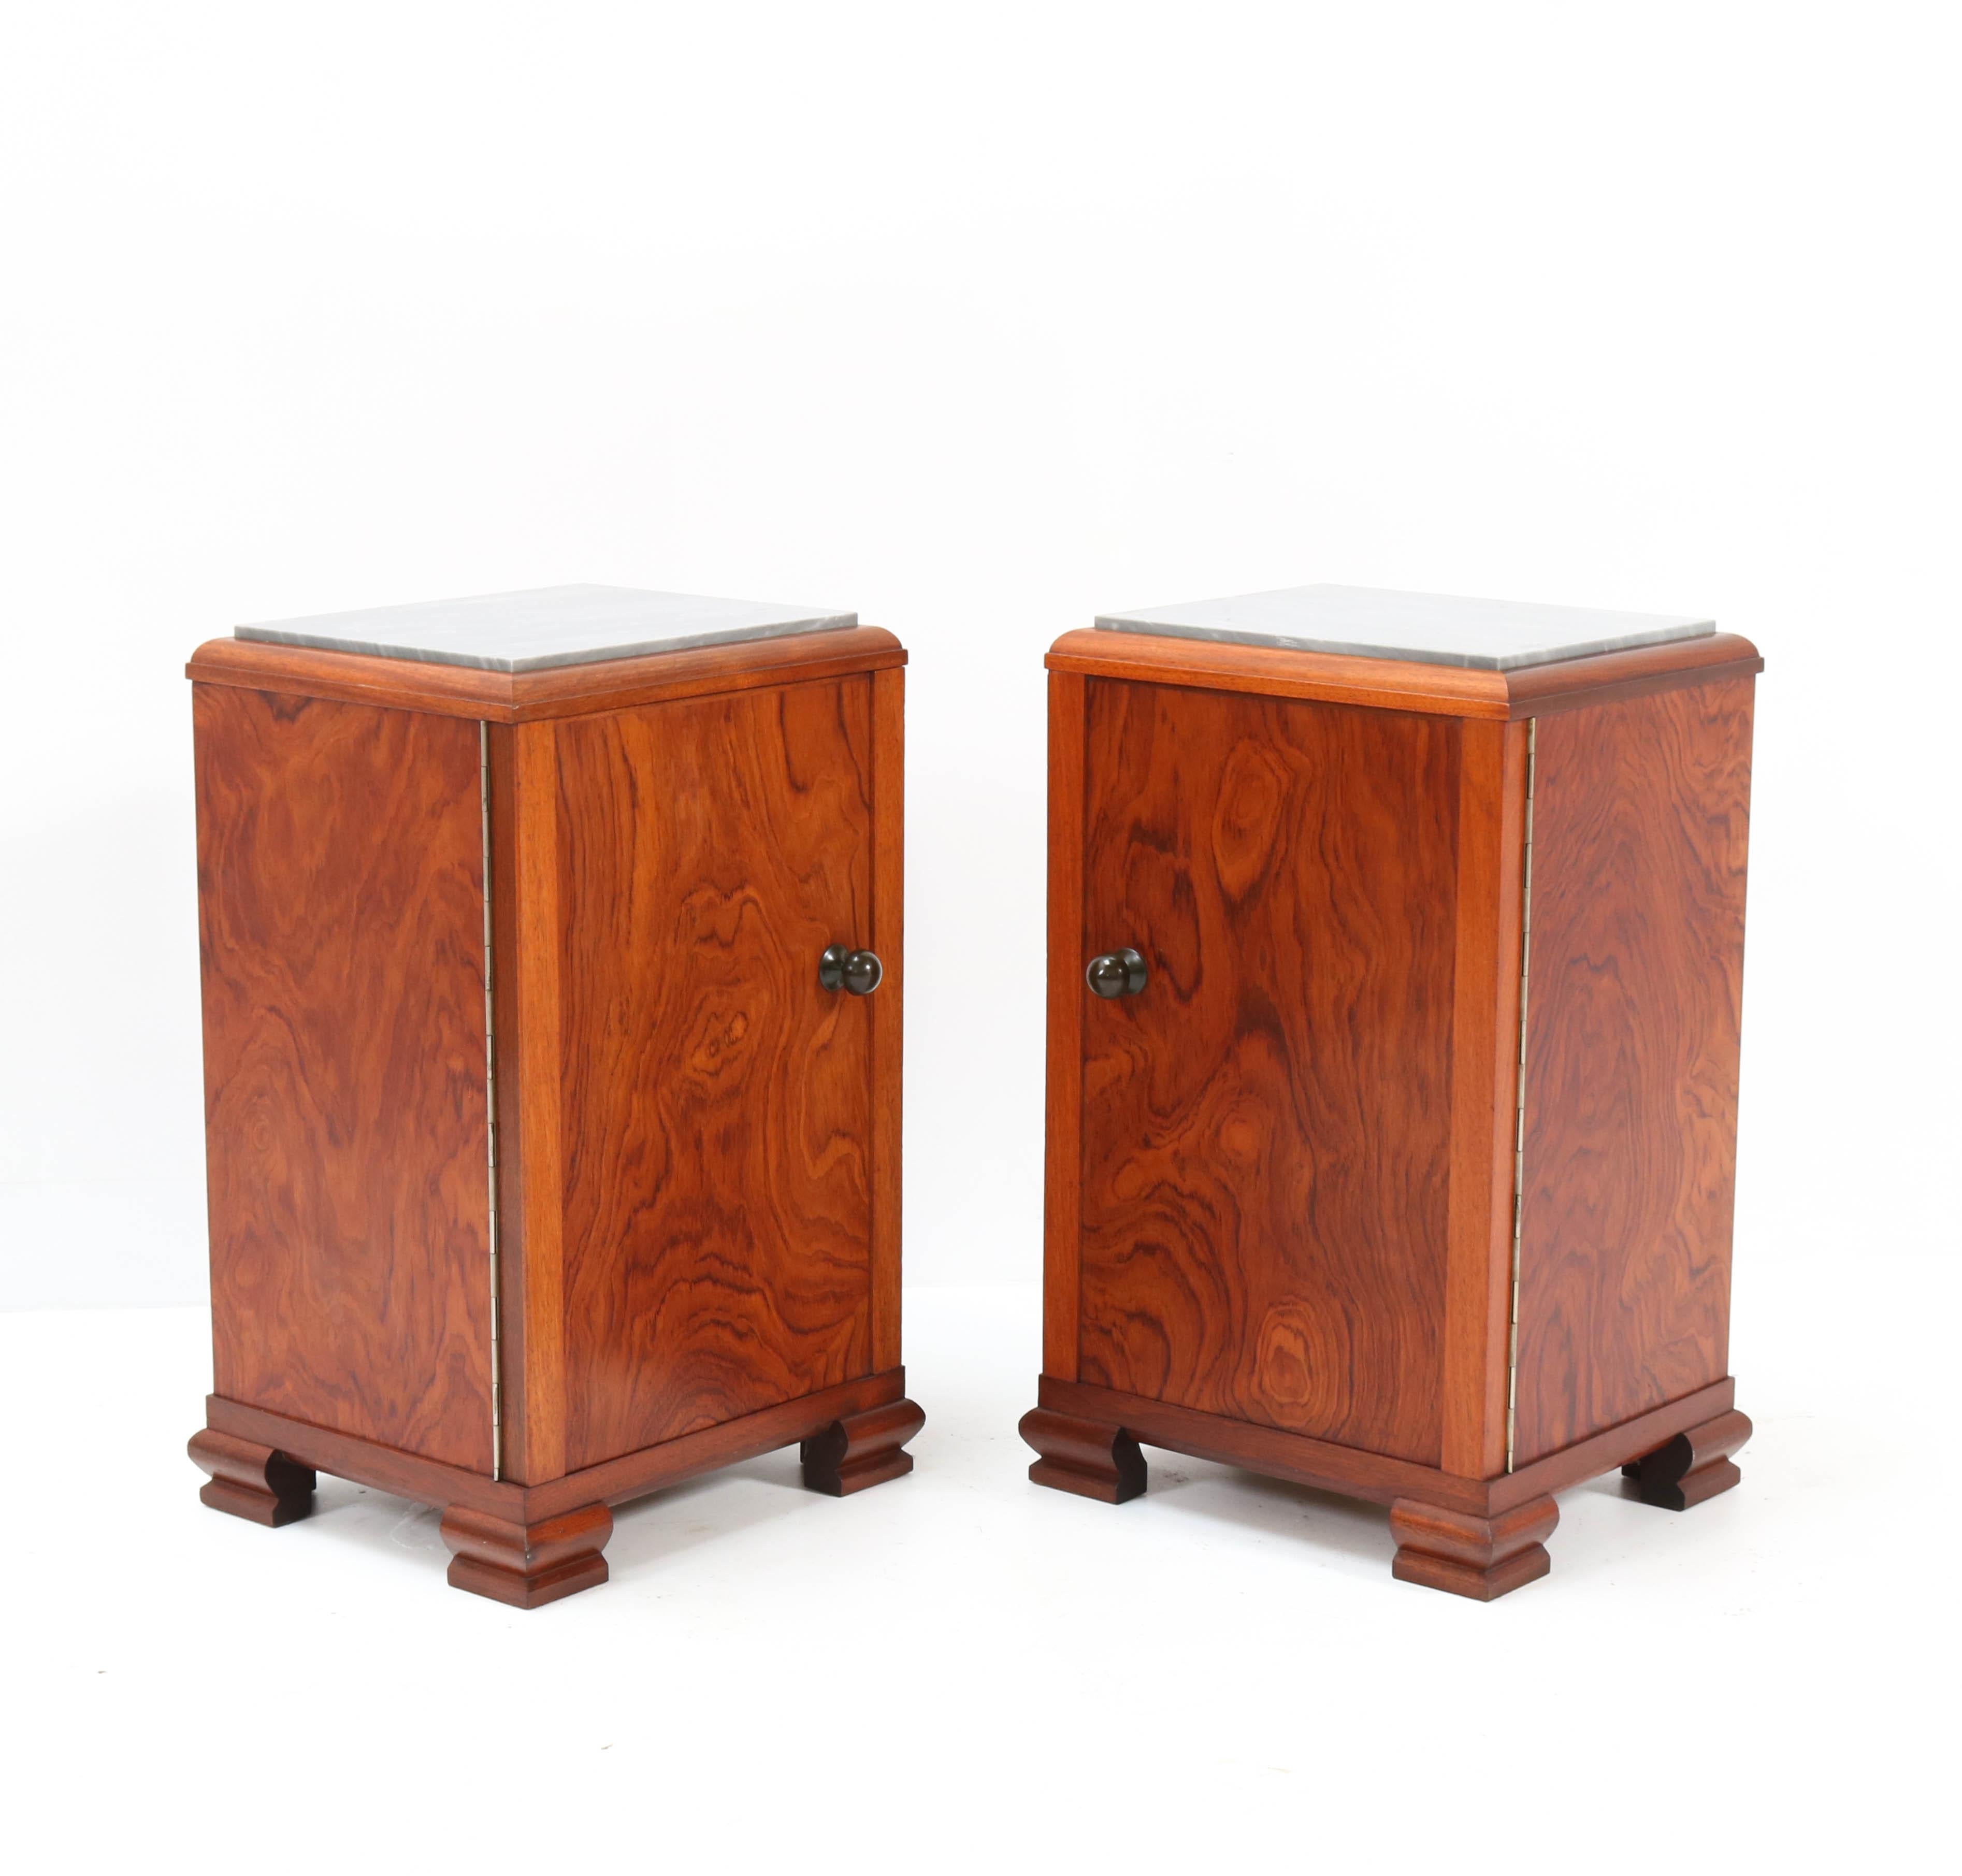 Brass Walnut French Art Deco Nightstands or Bedside Tables, 1930s